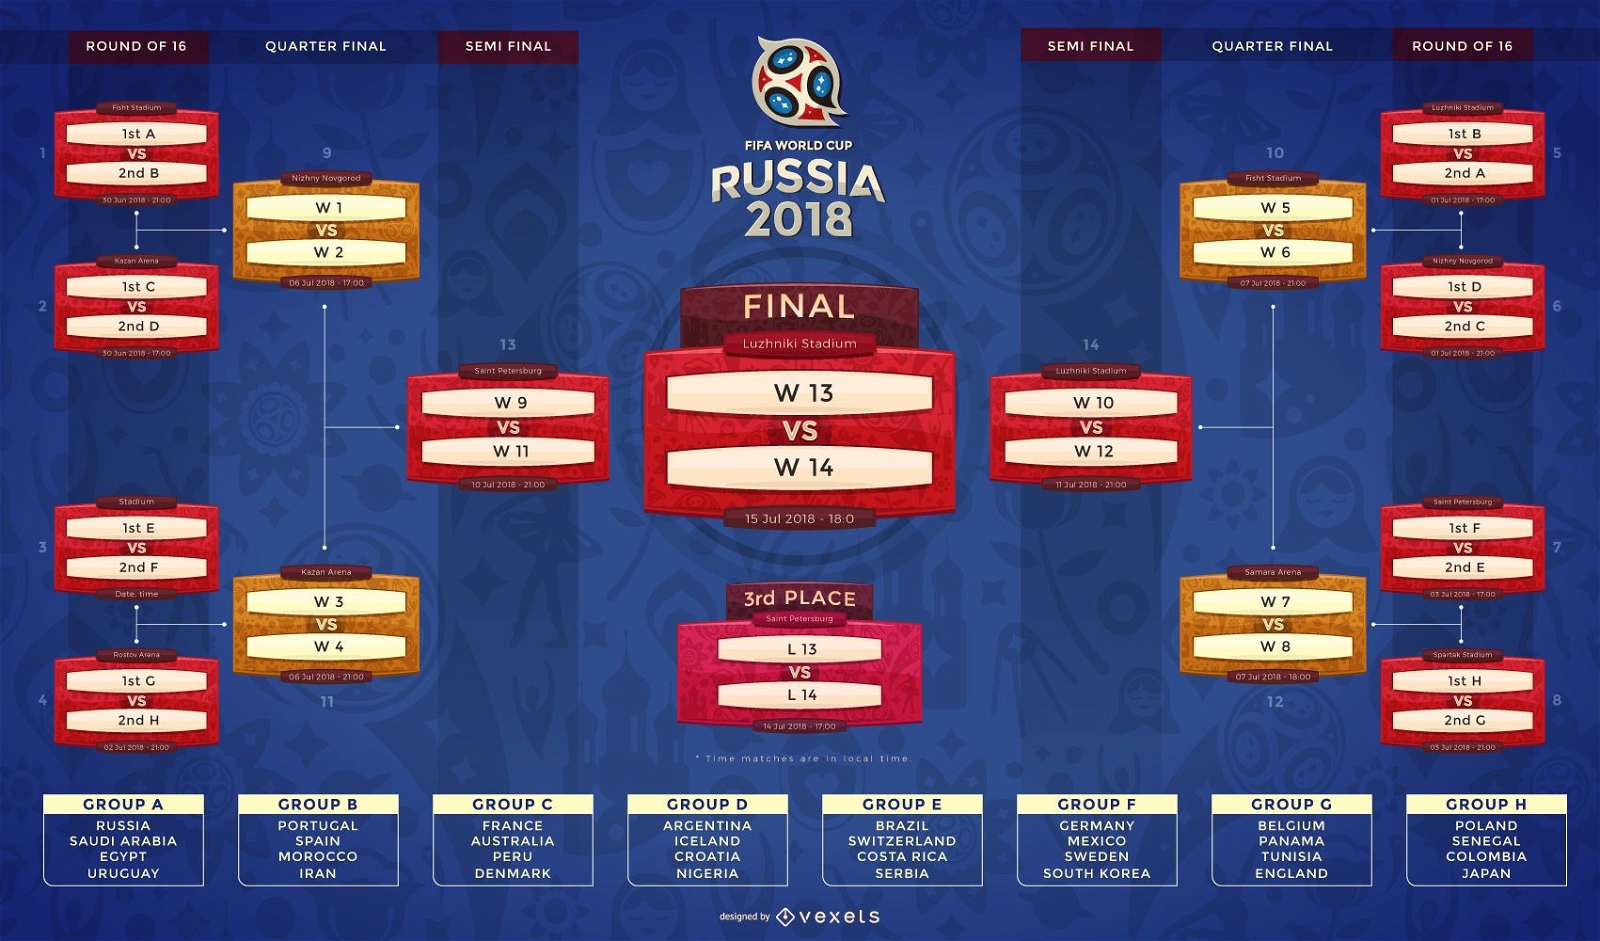 Russia 2018 fixture and team groups - Vector download